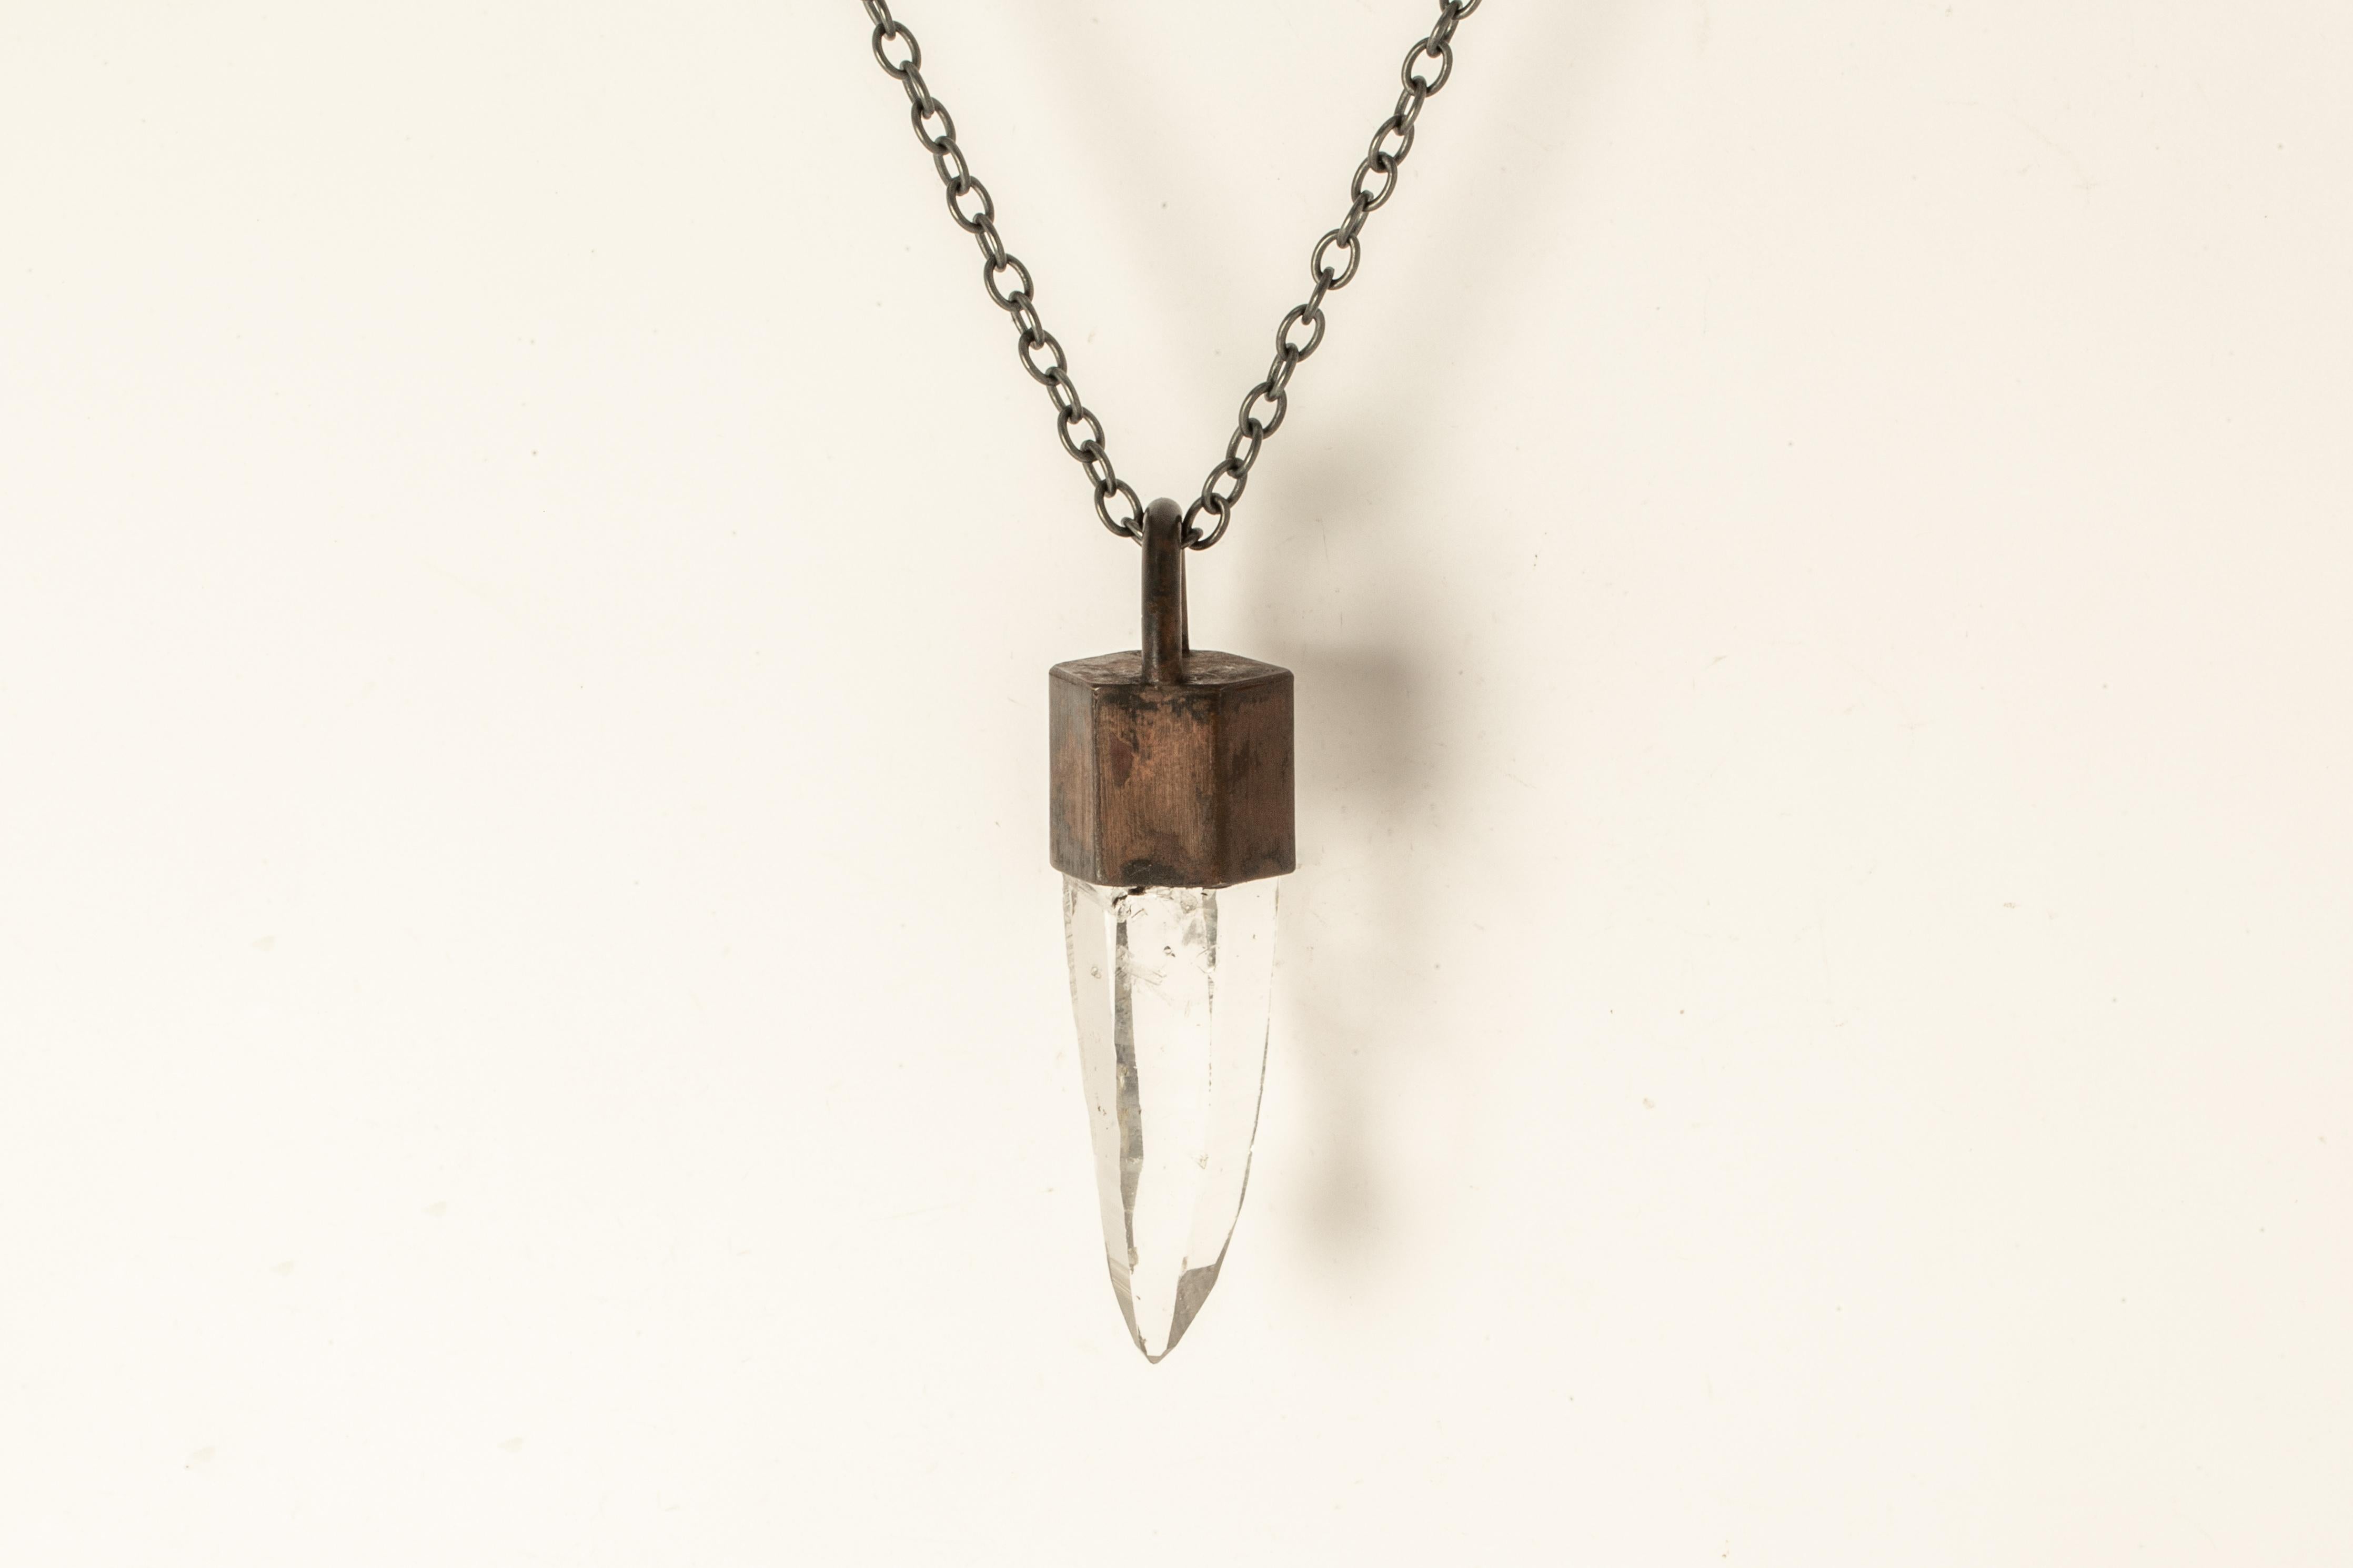 Necklace in dirty brass, oxidized sterling silver, and a rough of lemurian quartz. The Talisman series is an exploration into the power of natural crystals. Tools for Magic. The crystals used in these pieces are discovered through adventure and are